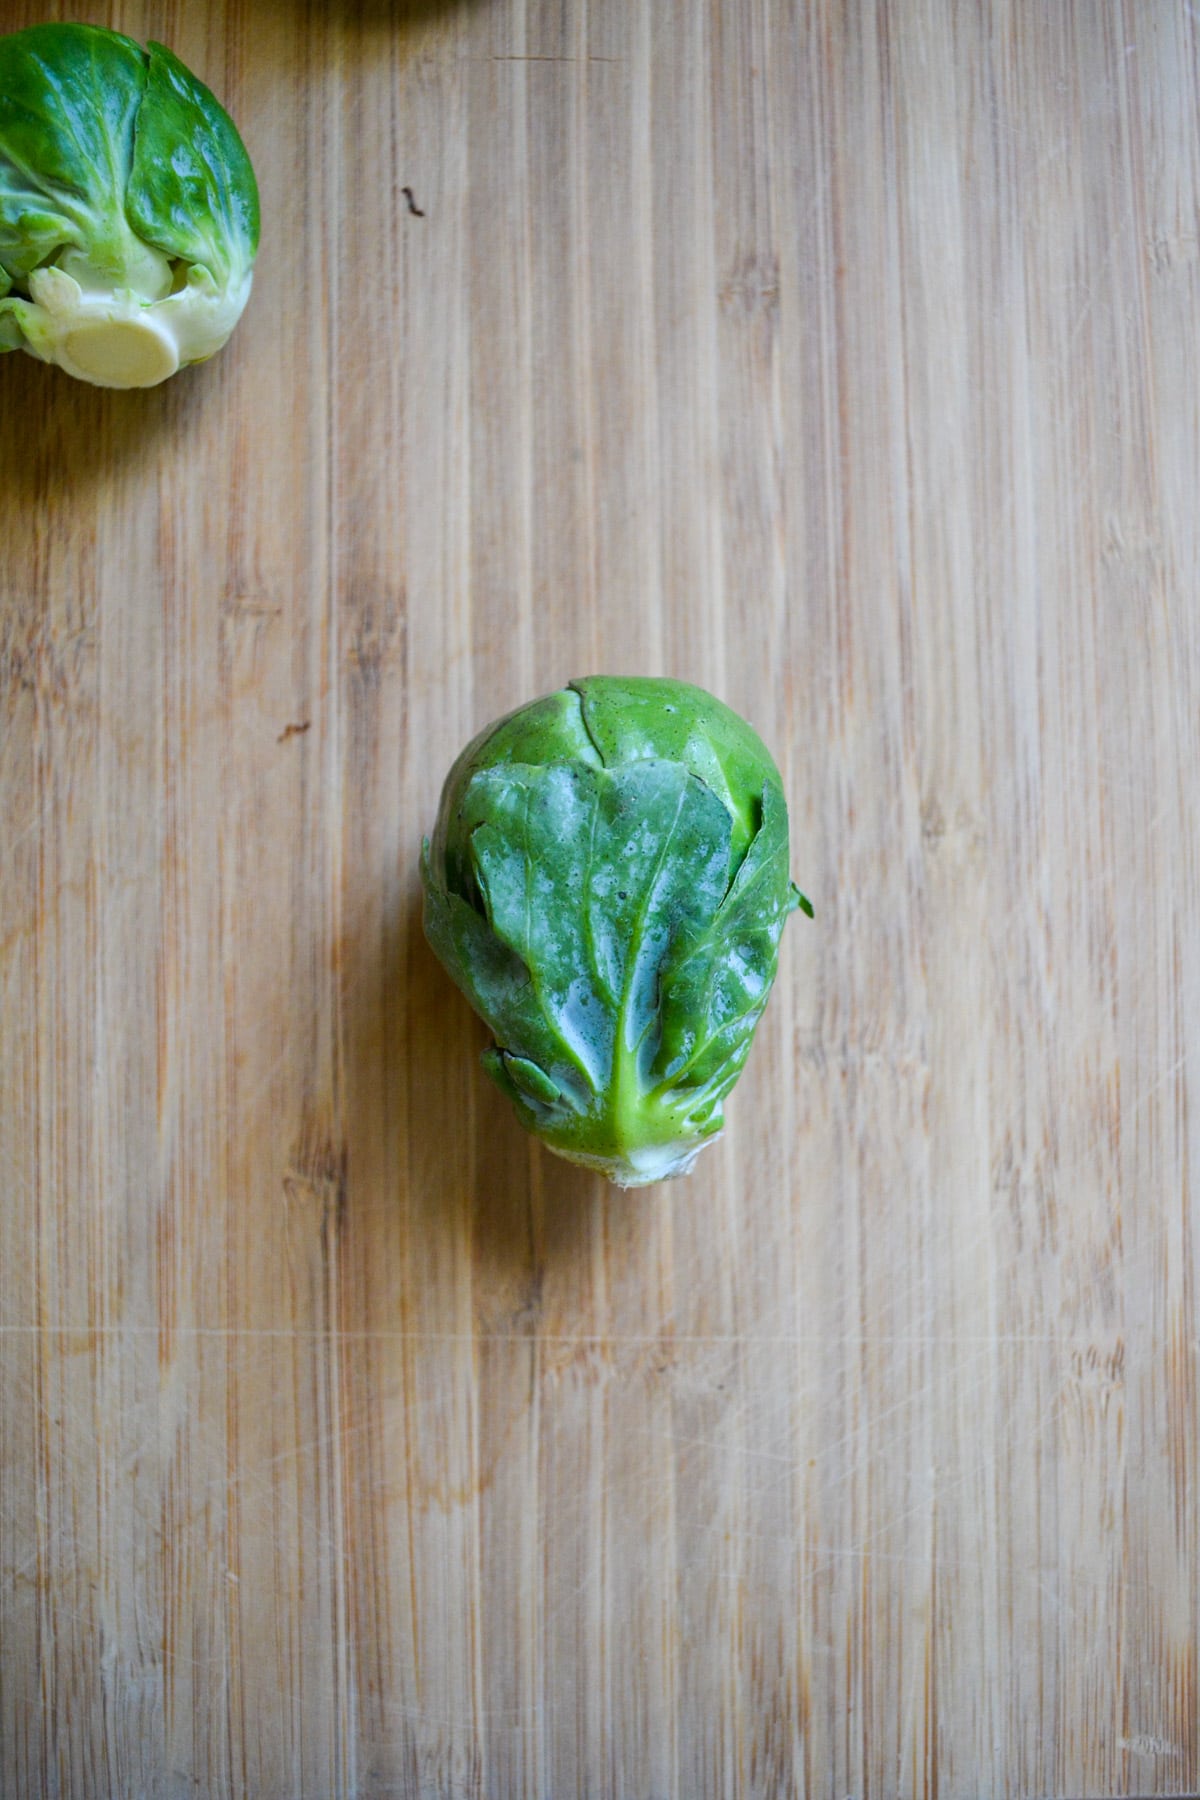 A brussels sprout on a wooden cutting board.